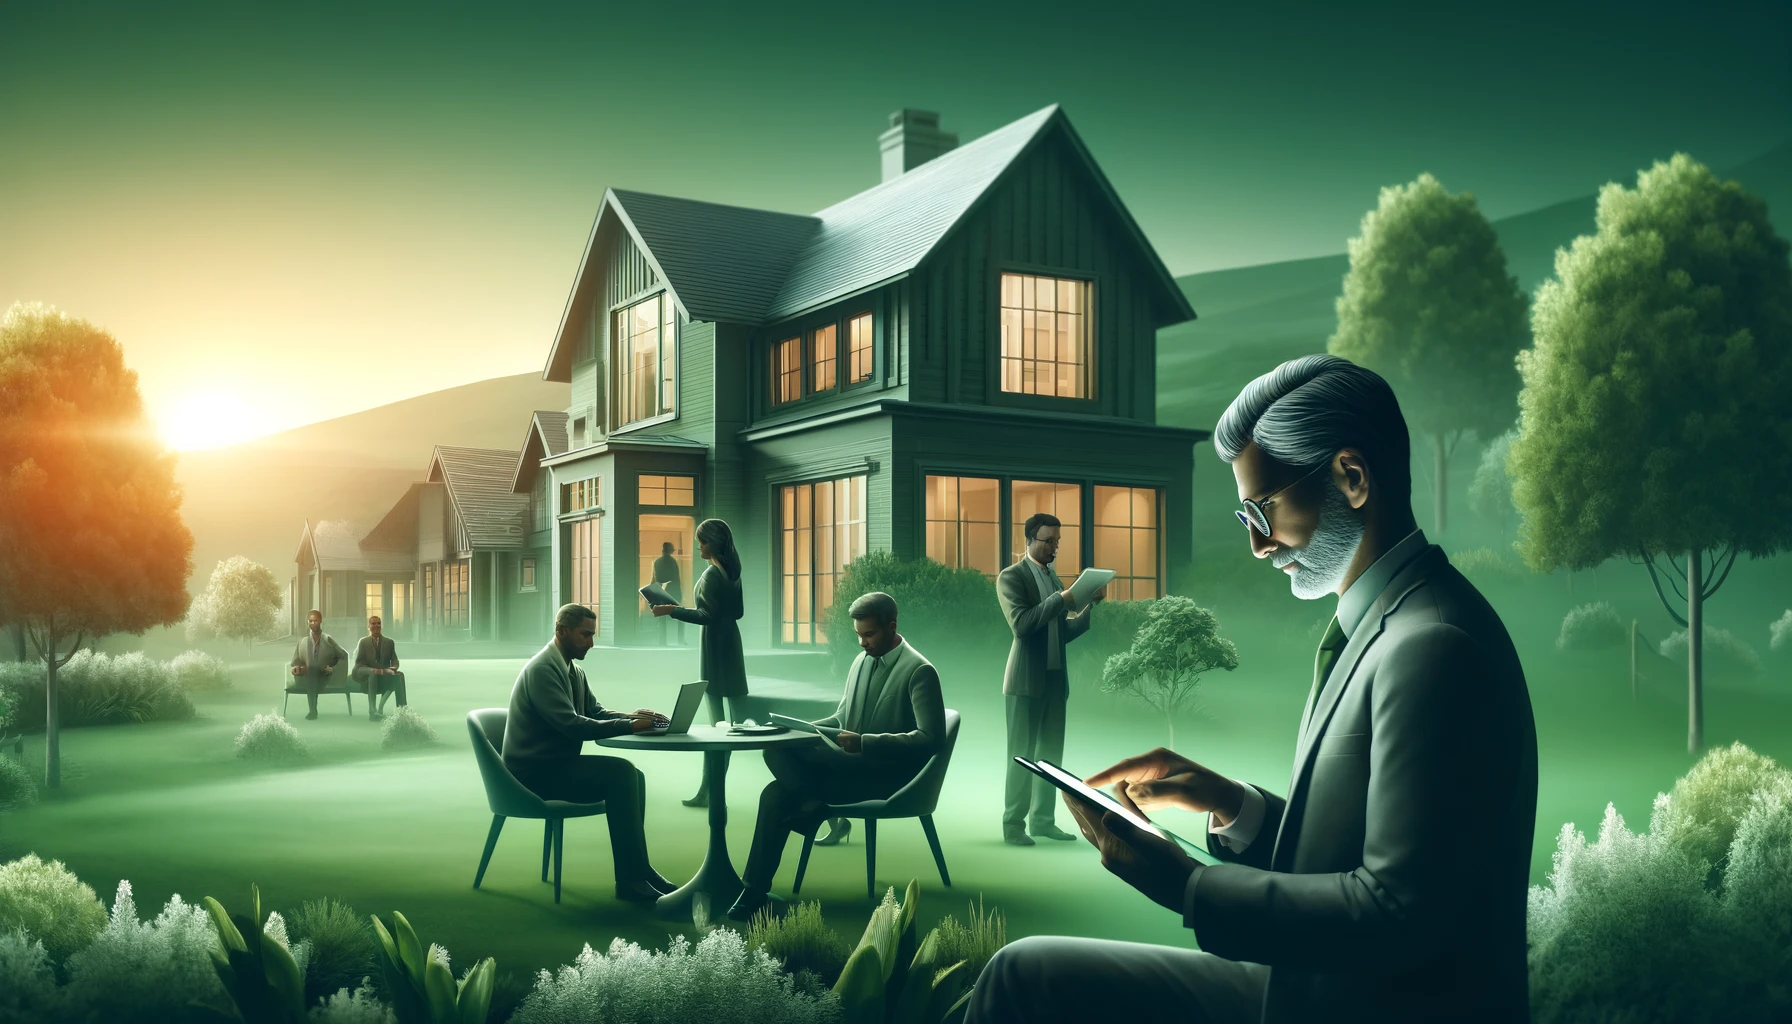 An elegant depiction of financial freedom and upscale opportunity, showcasing a sleek digital interface with ScaleMortgage's low doc home loan options illuminated under a spotlight.